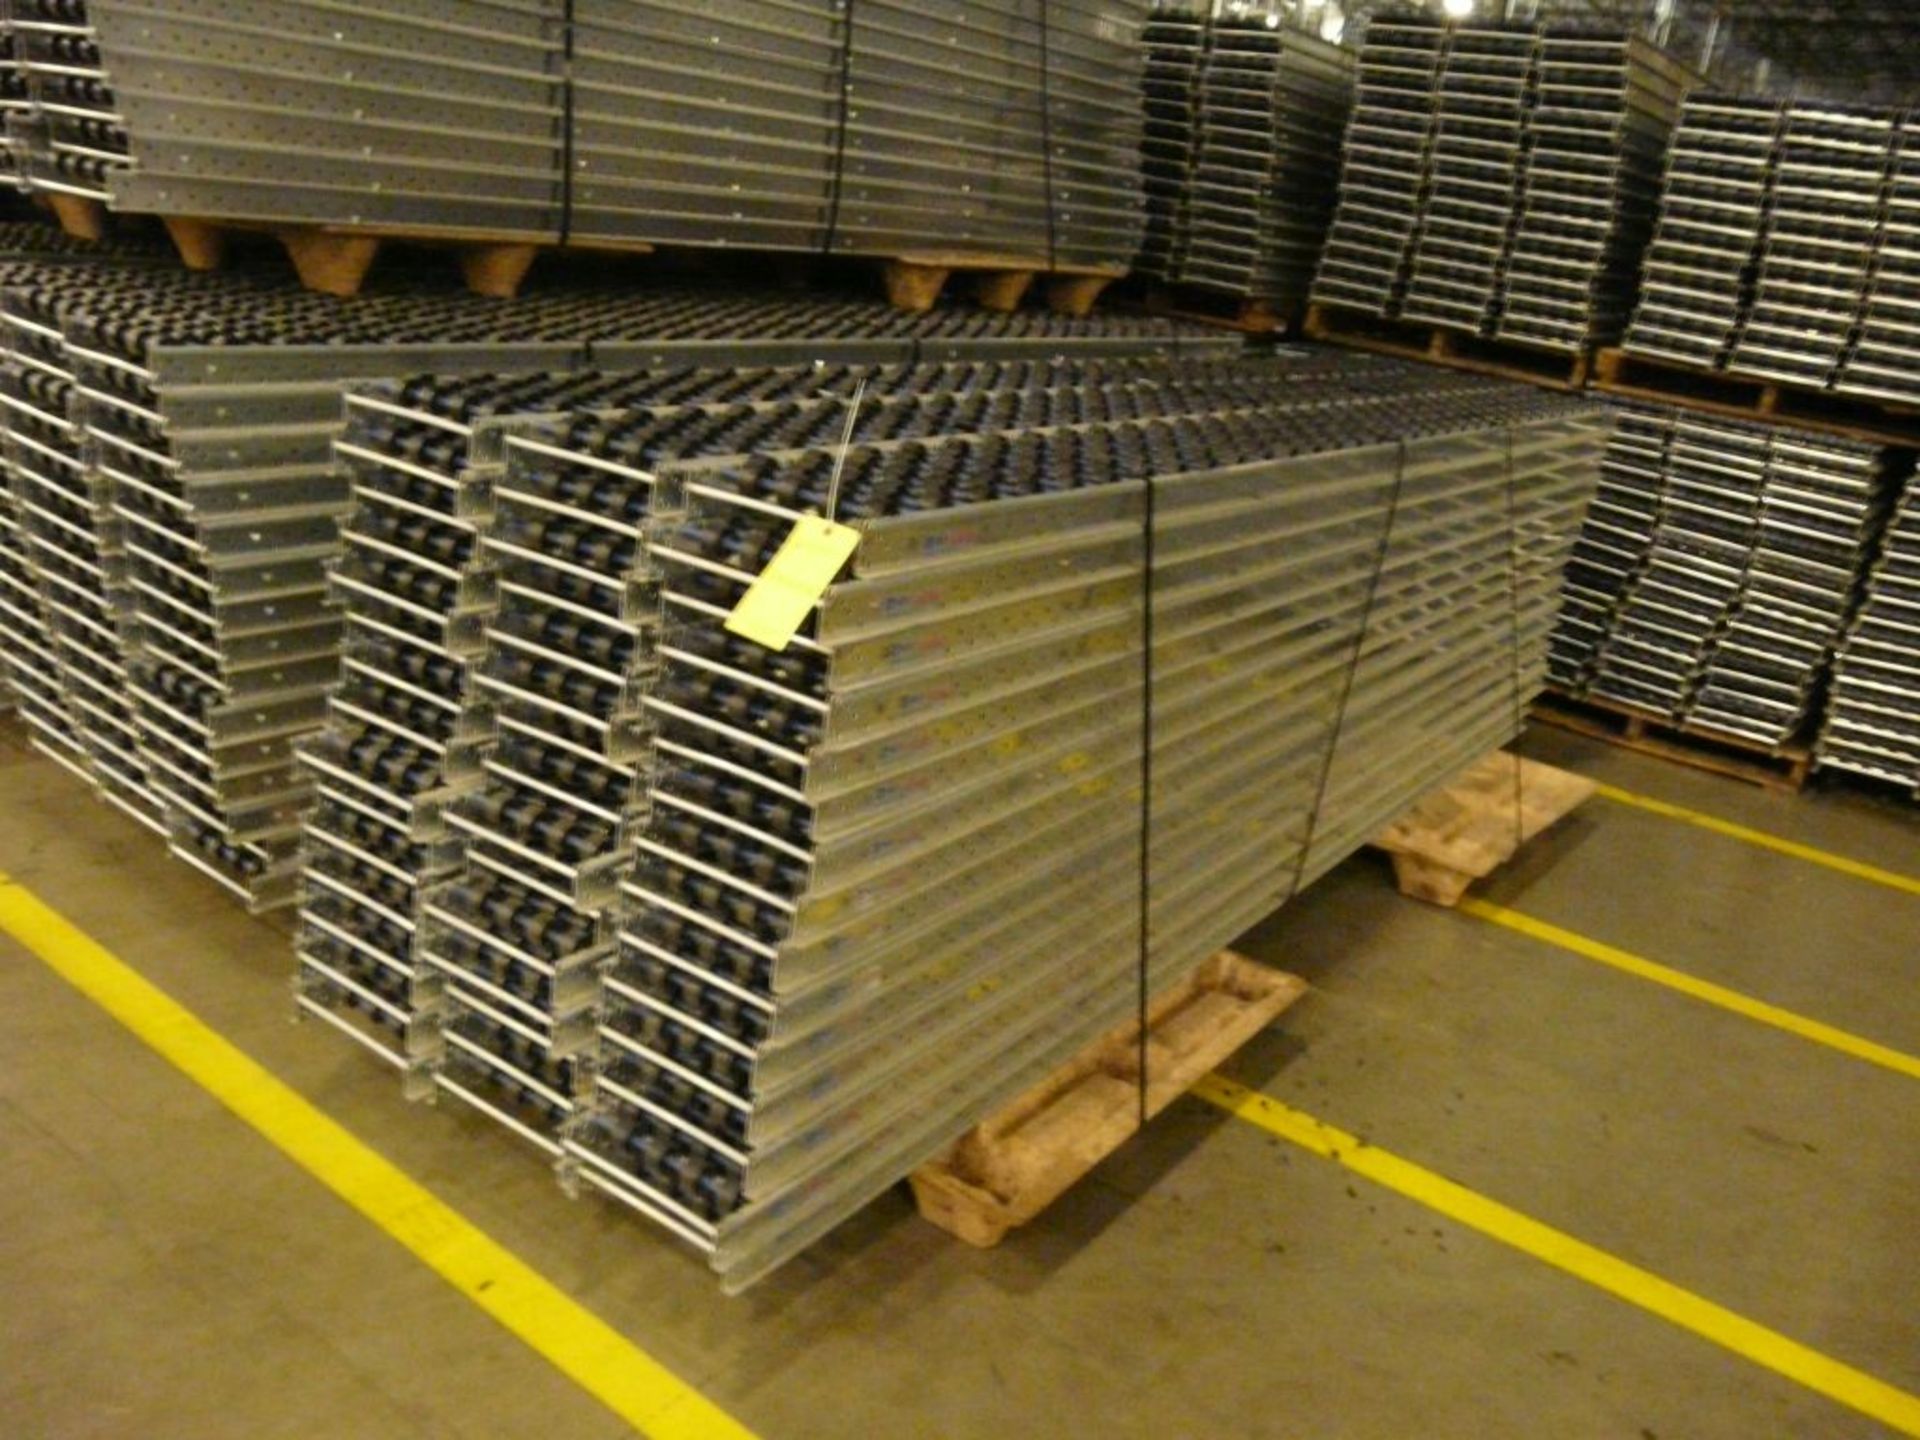 Lot of (90) SpanTrack Wheelbed Carton Flow Conveyors - 11.5'L x 11"W; Tag: 223560 - $30 Lot